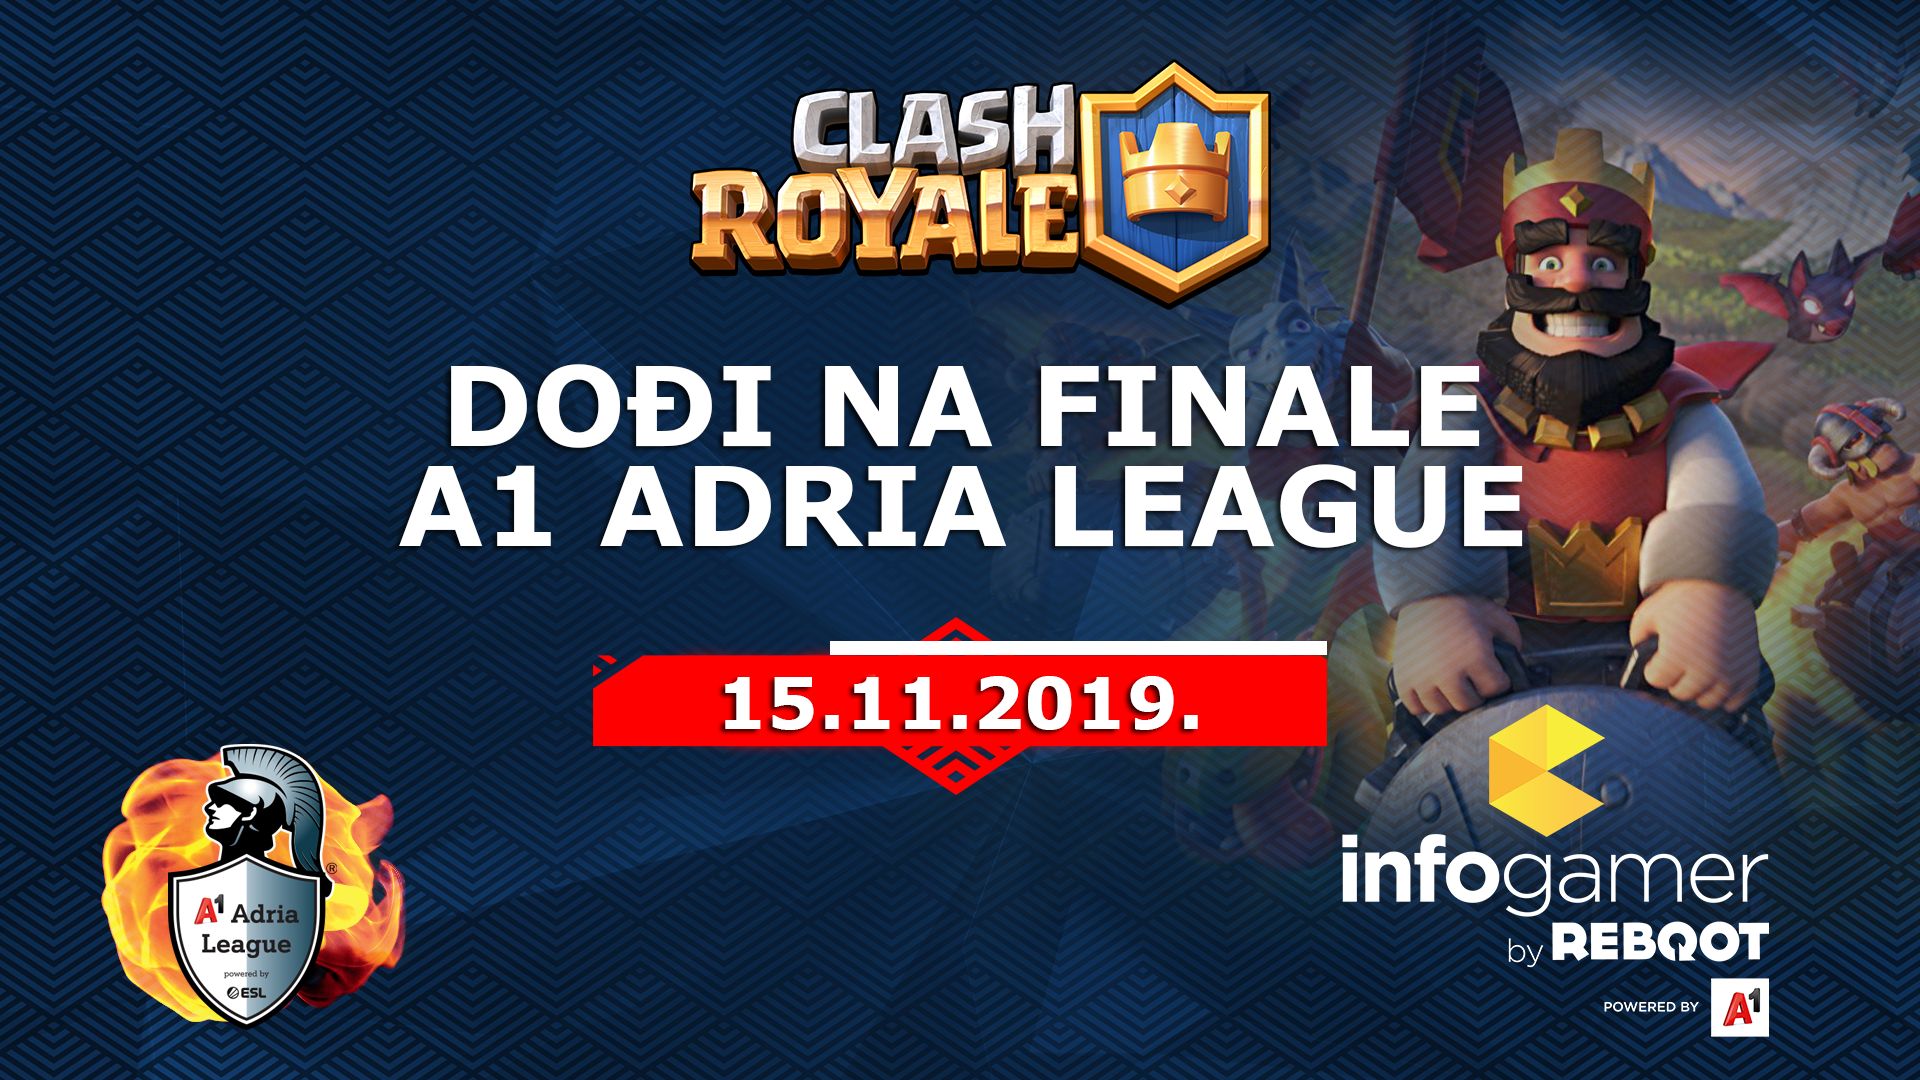 A1 Adria League - veliko CLASH ROYALE finale @ Reboot InfoGamer 2019 powered by A1 - Reboot